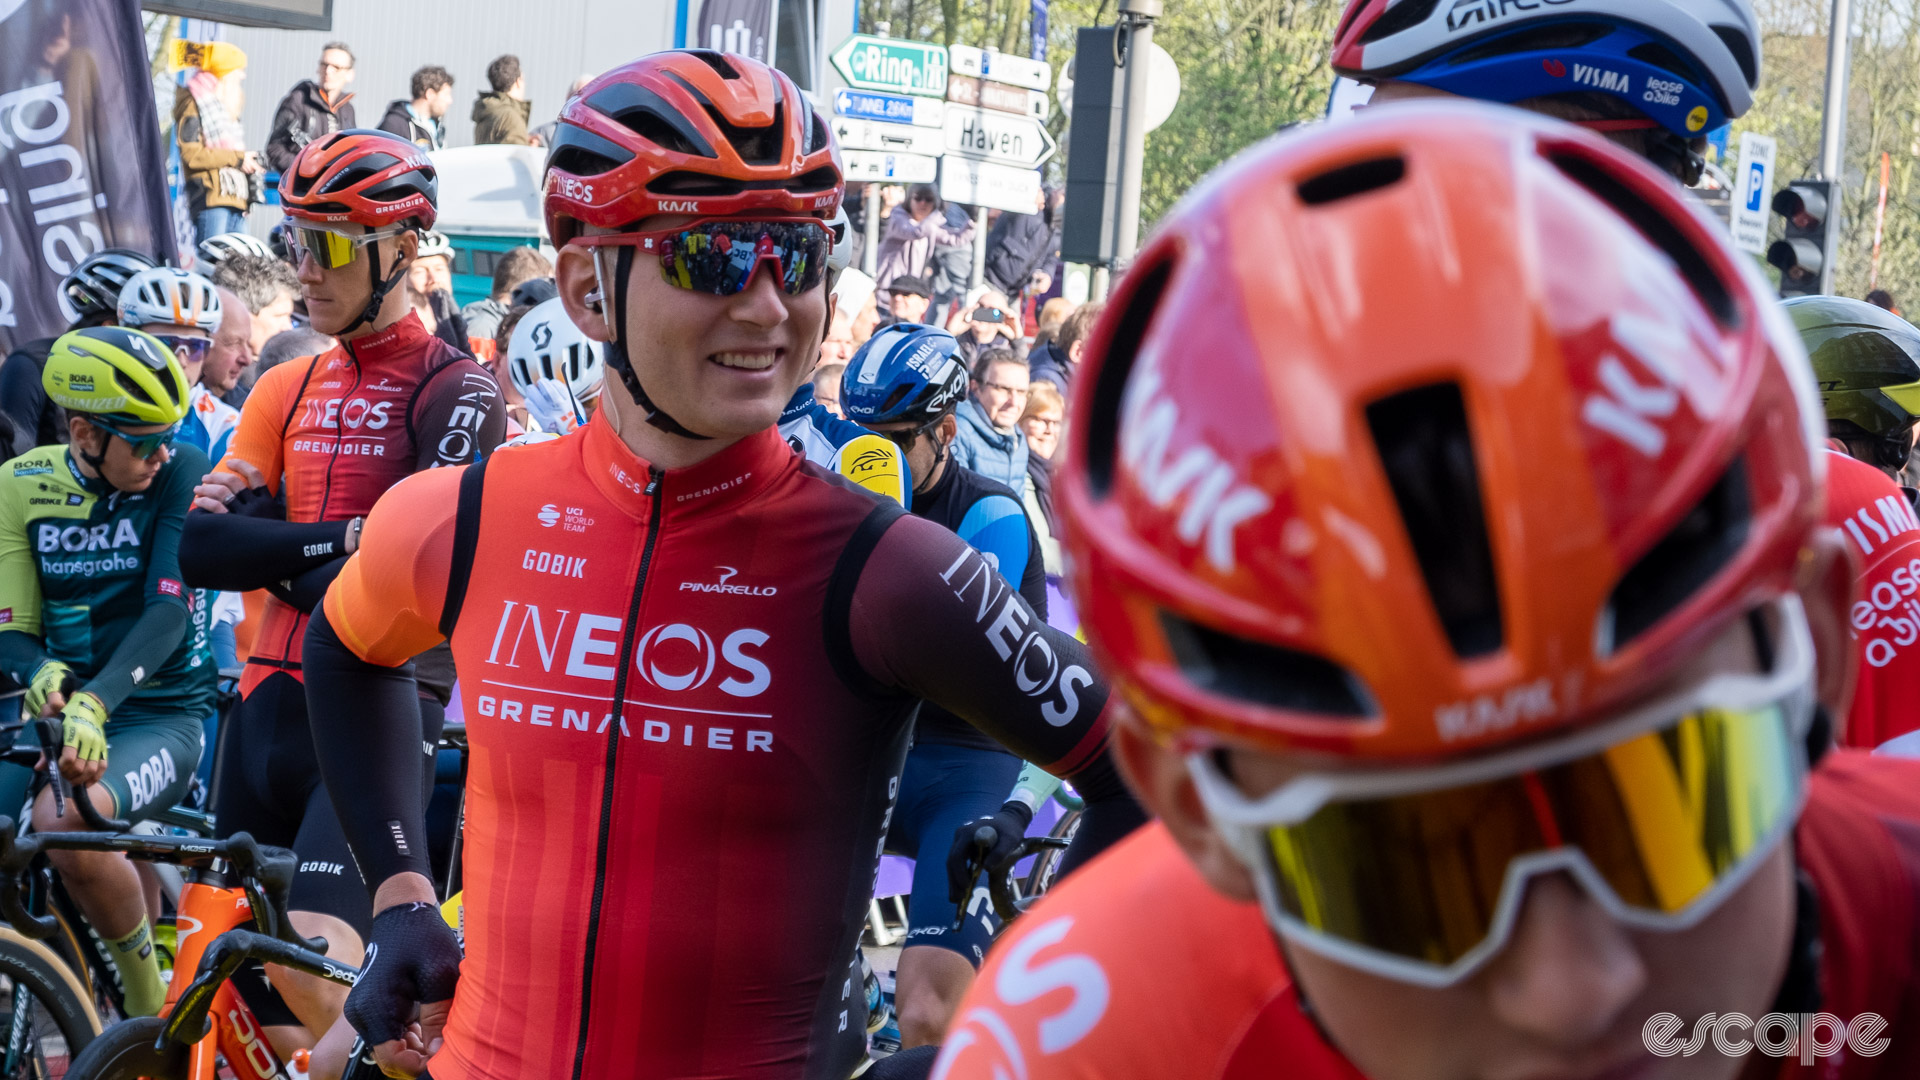 The image shows three Ineos riders with two different helmets. 